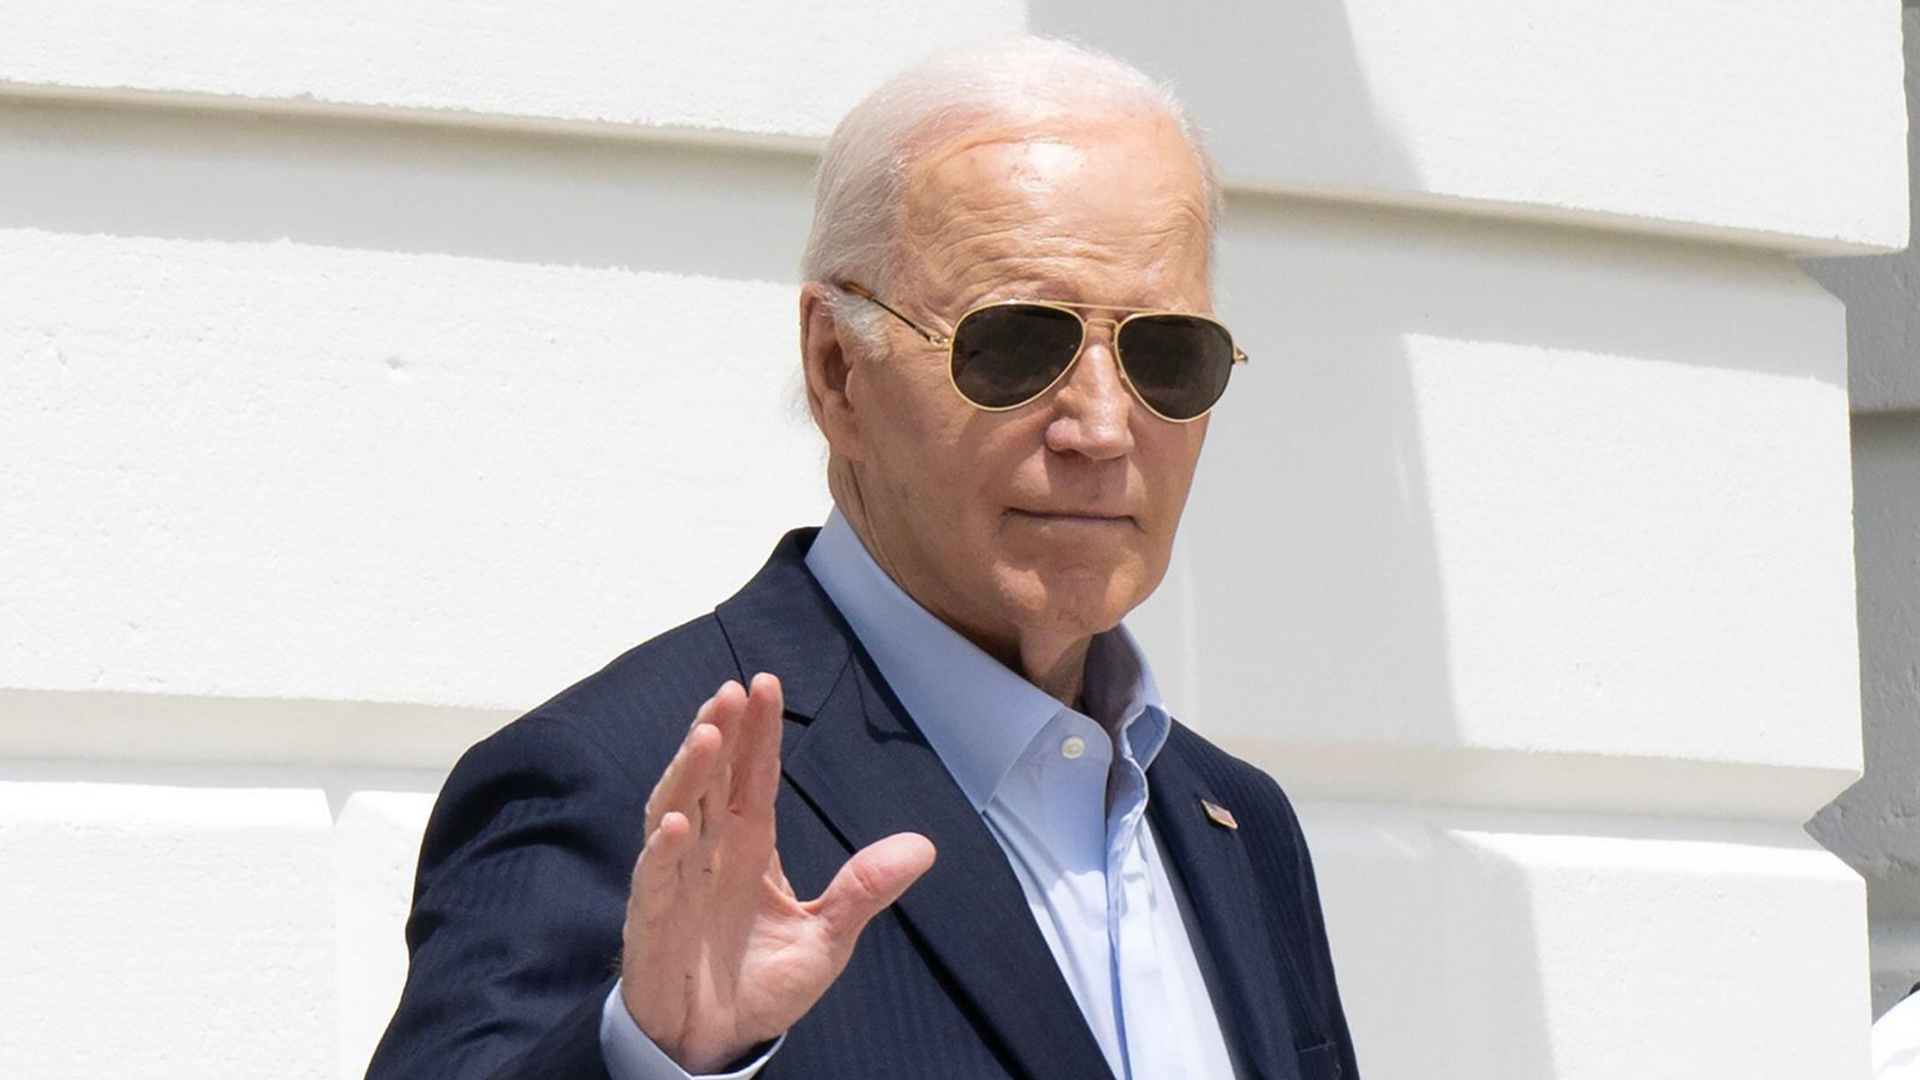 ‘Last thing we should be focusing on,’ fires baffled American after Biden vows to make marijuana less dangerous drug [Video]